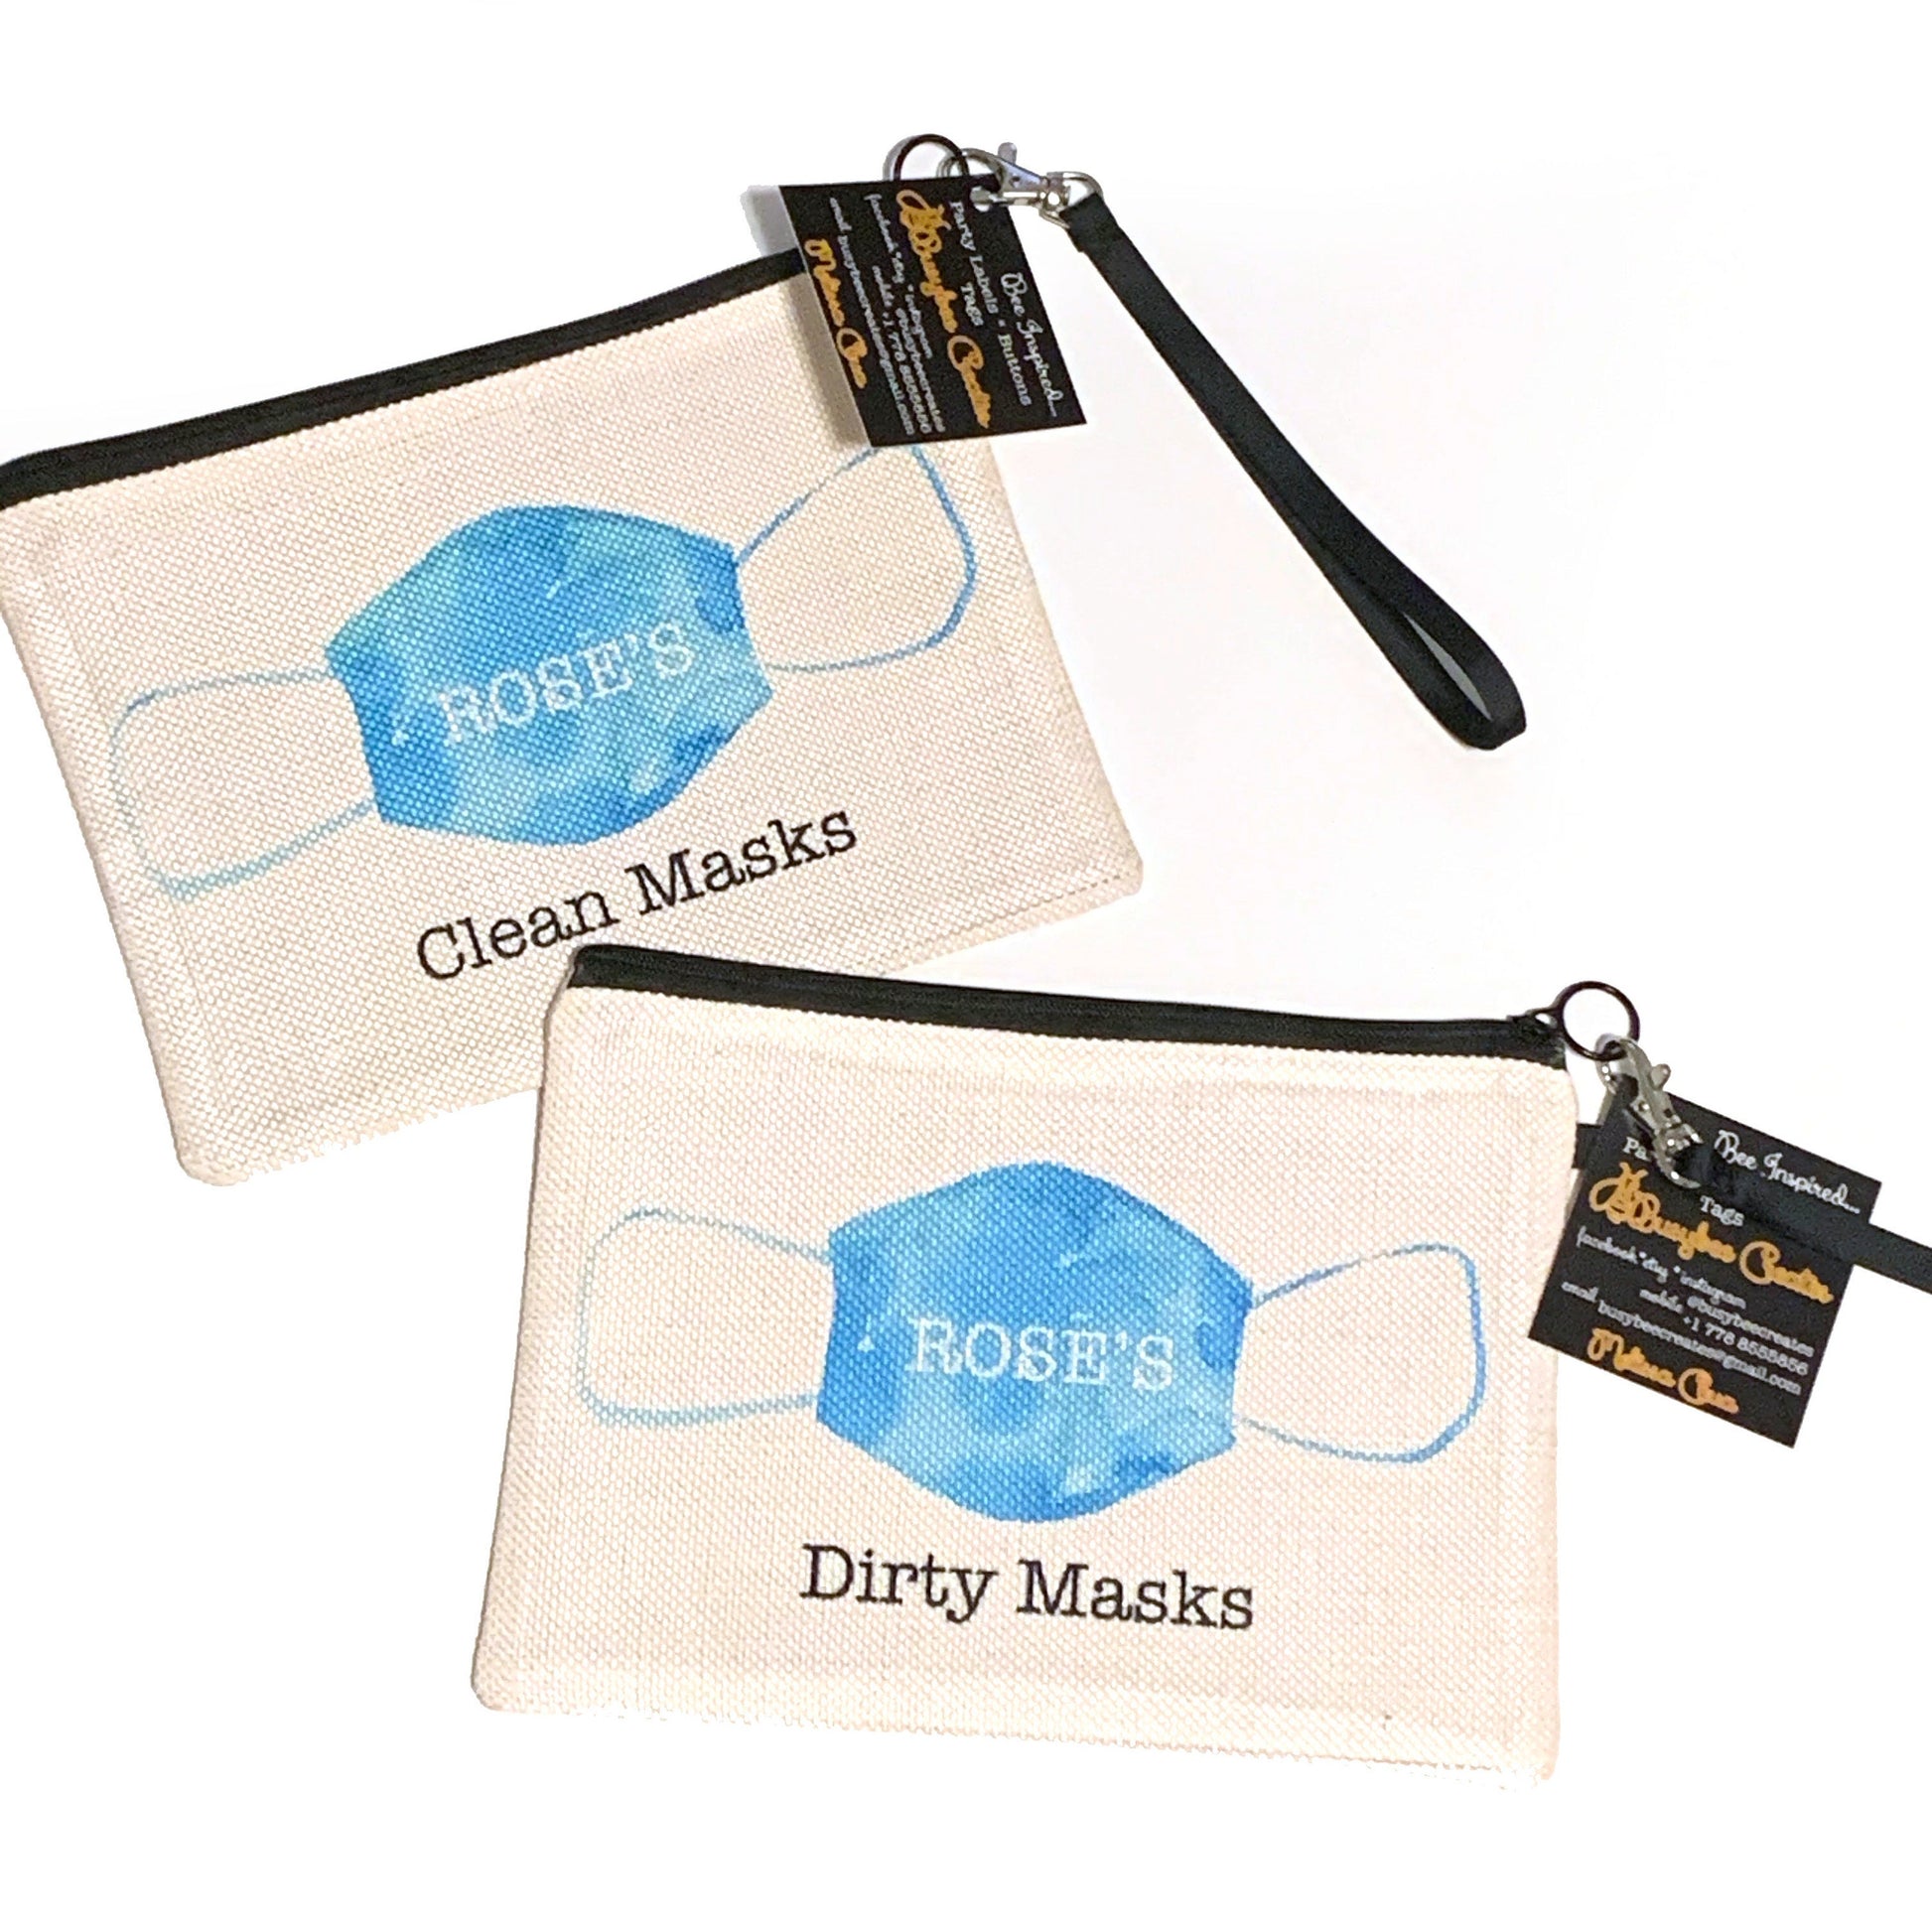 Personalized Face Masks Pouch, Set of 2 Dirty and Clean Mask Bag with USA Flag